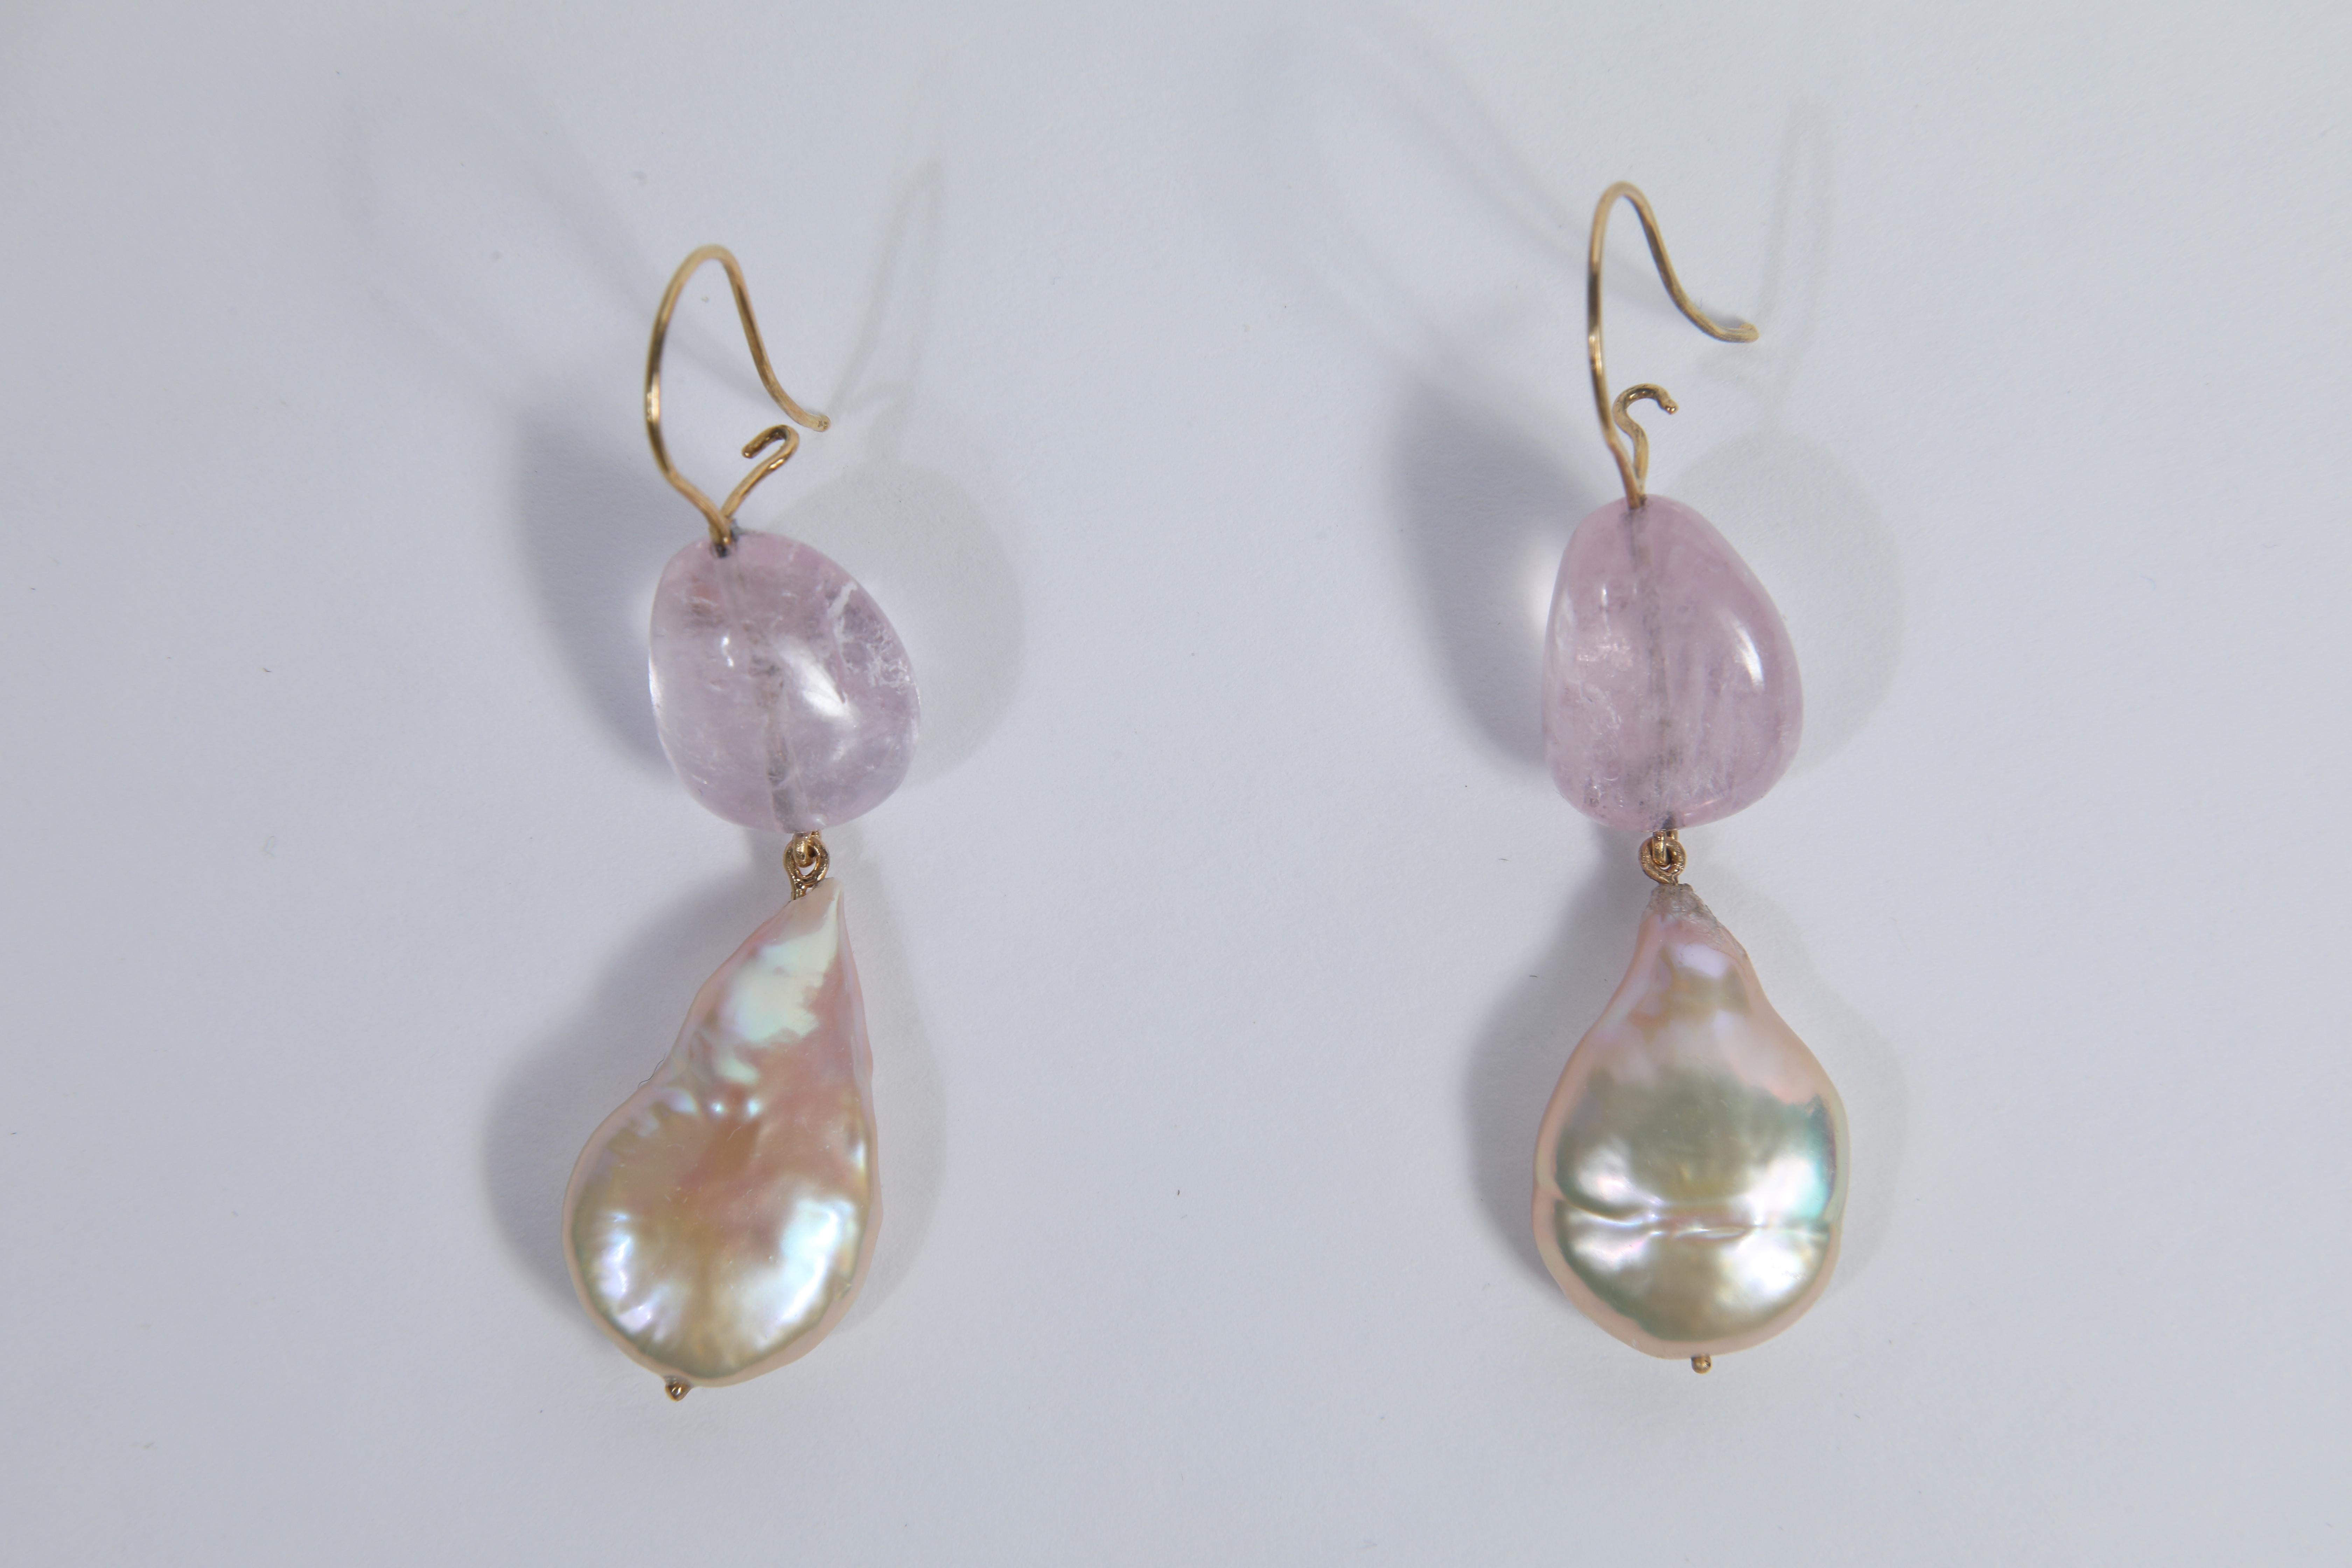 Pinkish white fresh water pearls earrings, baroque shape, 18 K yellow gold swan neck attachments. 

Price without local taxes
Pink beryls weight: 18.95 carats